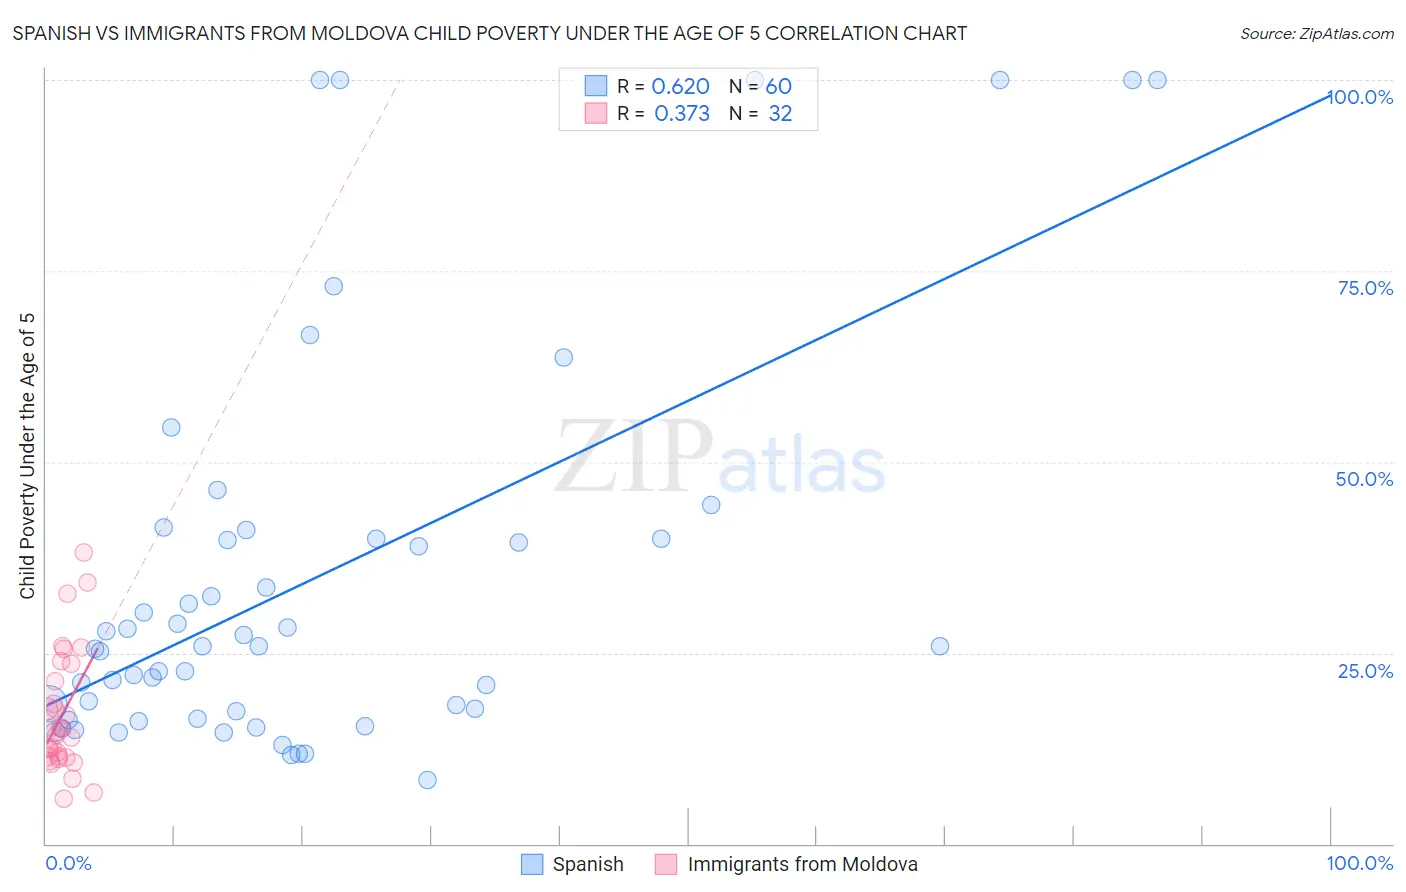 Spanish vs Immigrants from Moldova Child Poverty Under the Age of 5